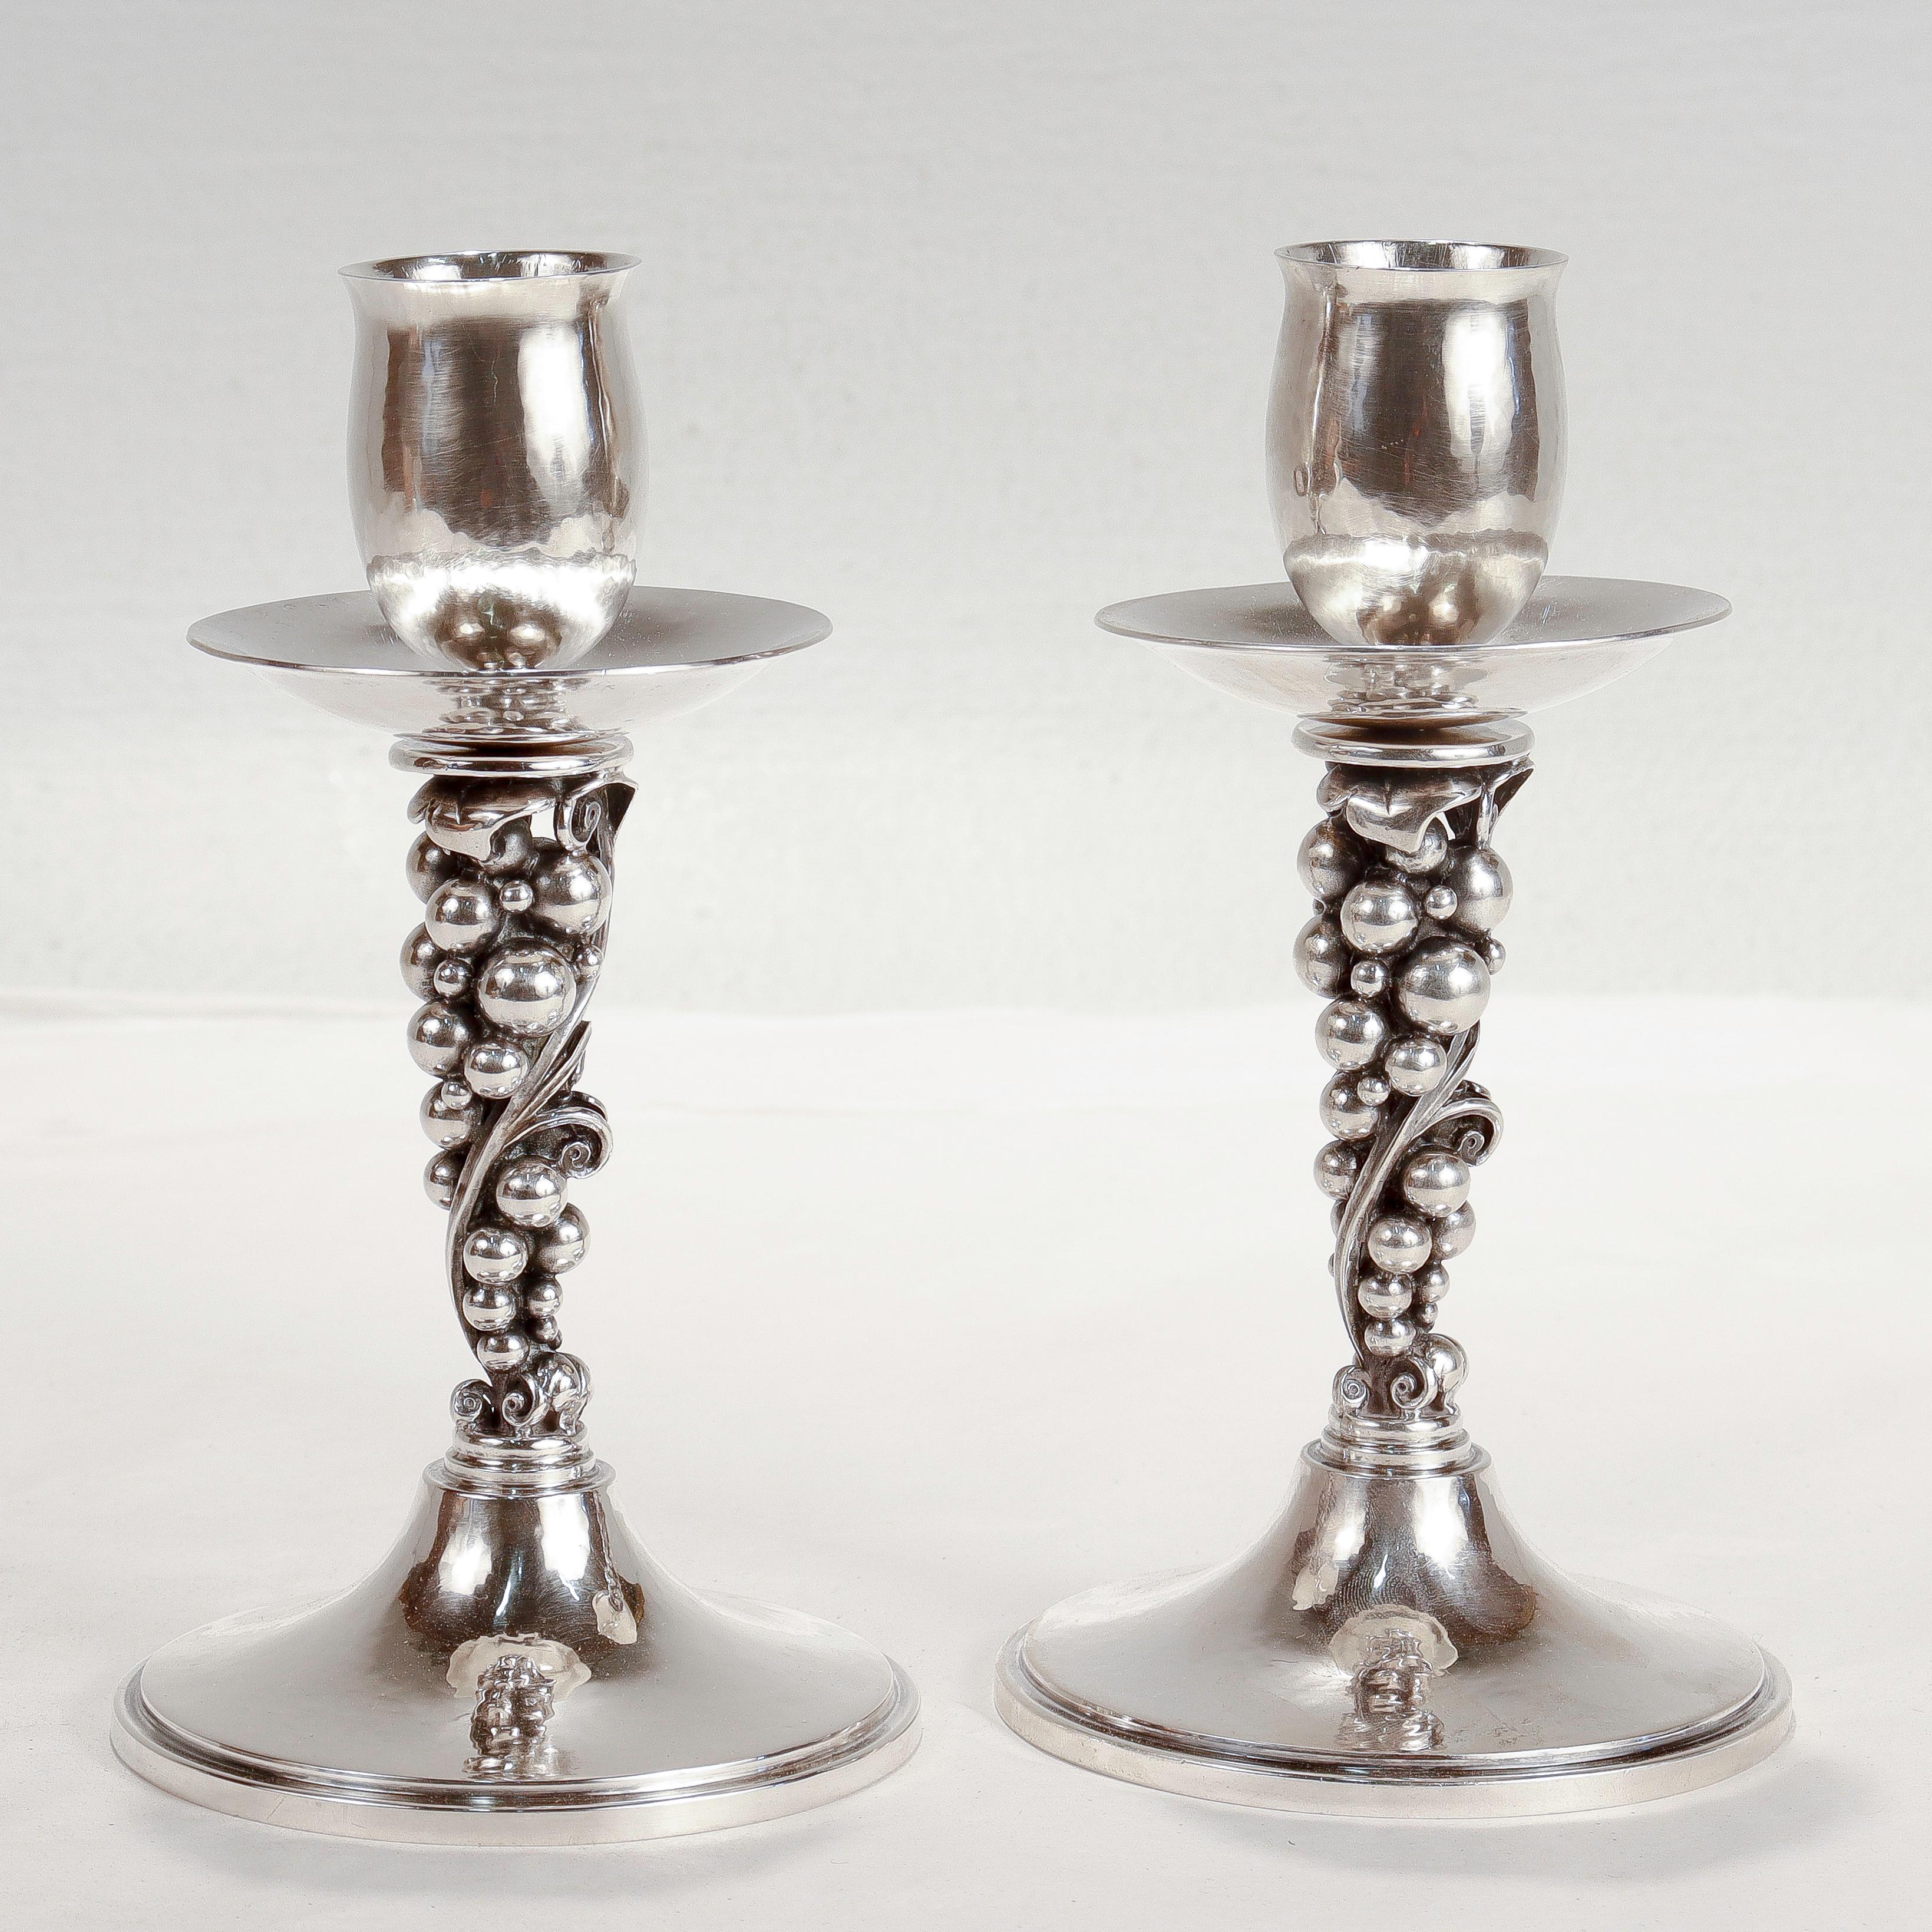 Pair of Signed Danish Modern Sterling Silver Grapes Candlesticks by Aage Weimar In Good Condition For Sale In Philadelphia, PA